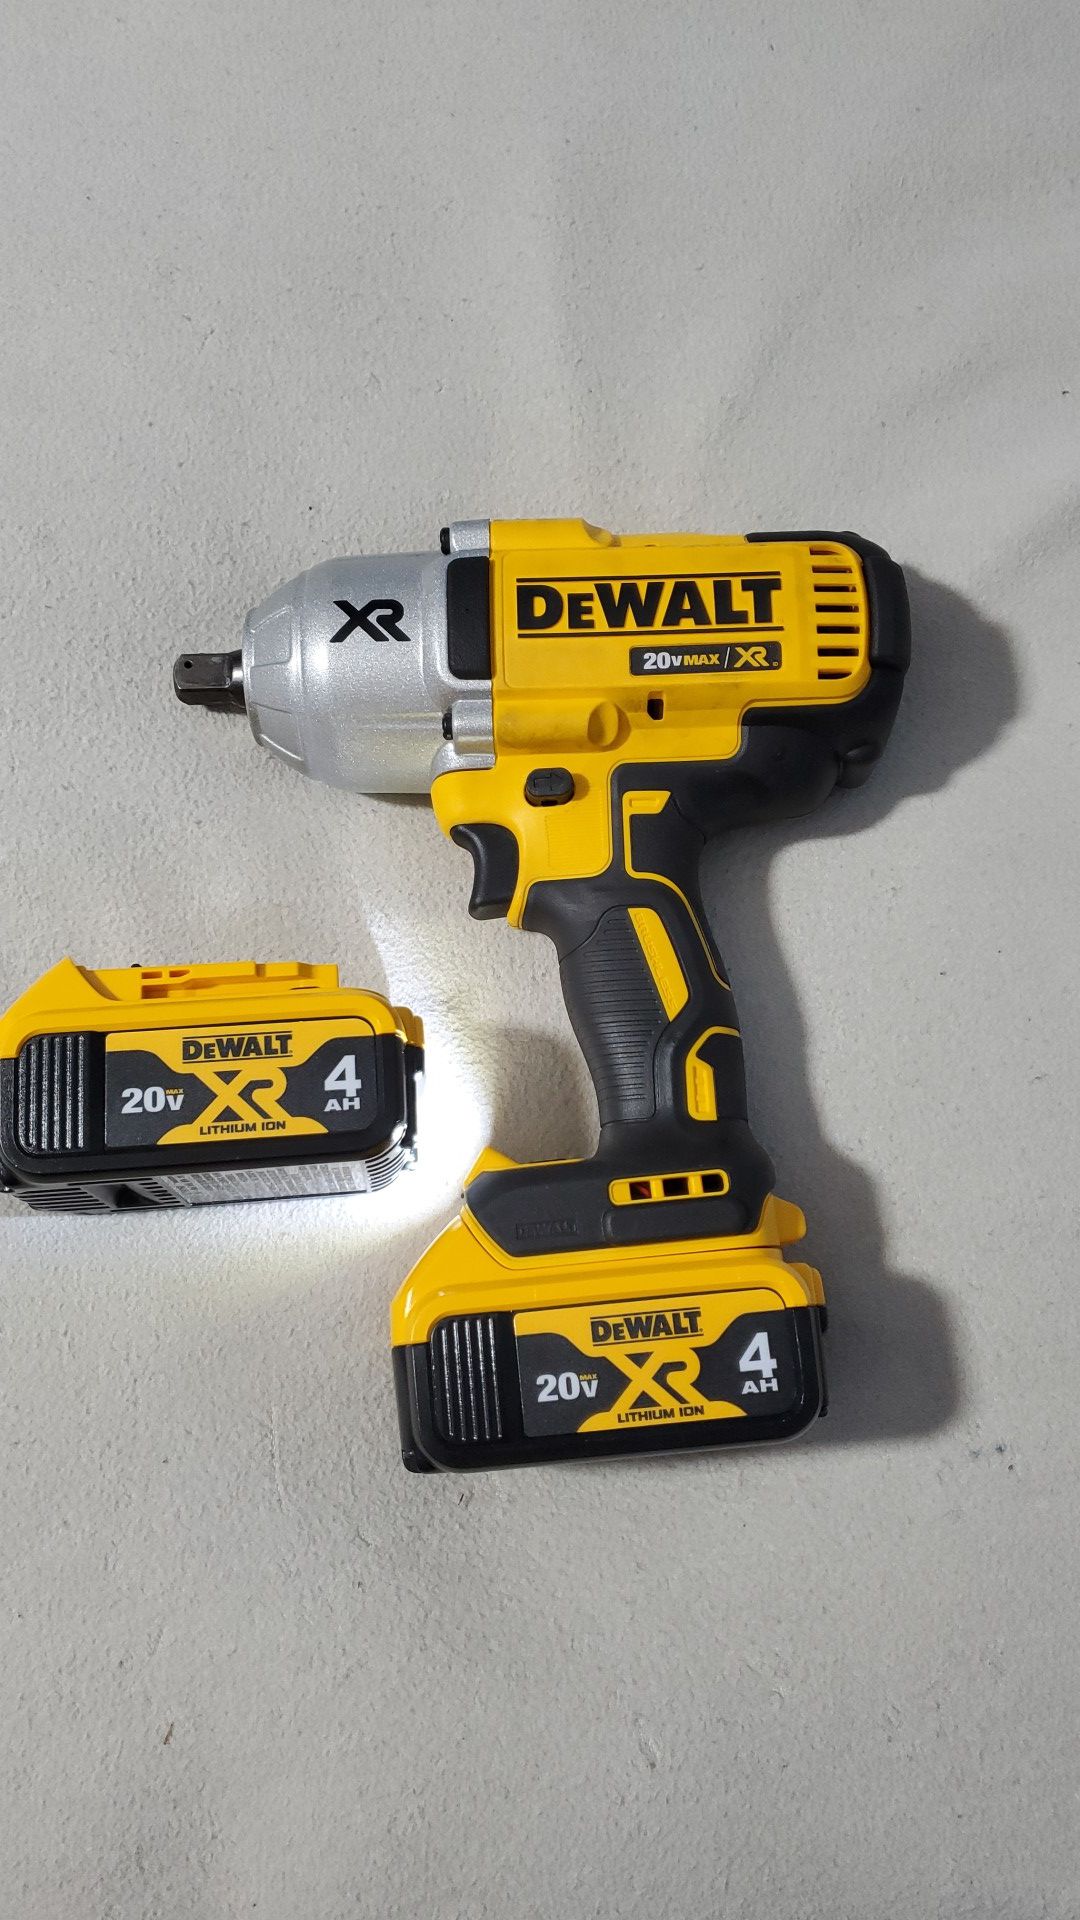 Dewalt 20V Max XR Brushless 1/2in High Torque Impact Wrench. W/ 2 new 4ah XR batteries. Firm